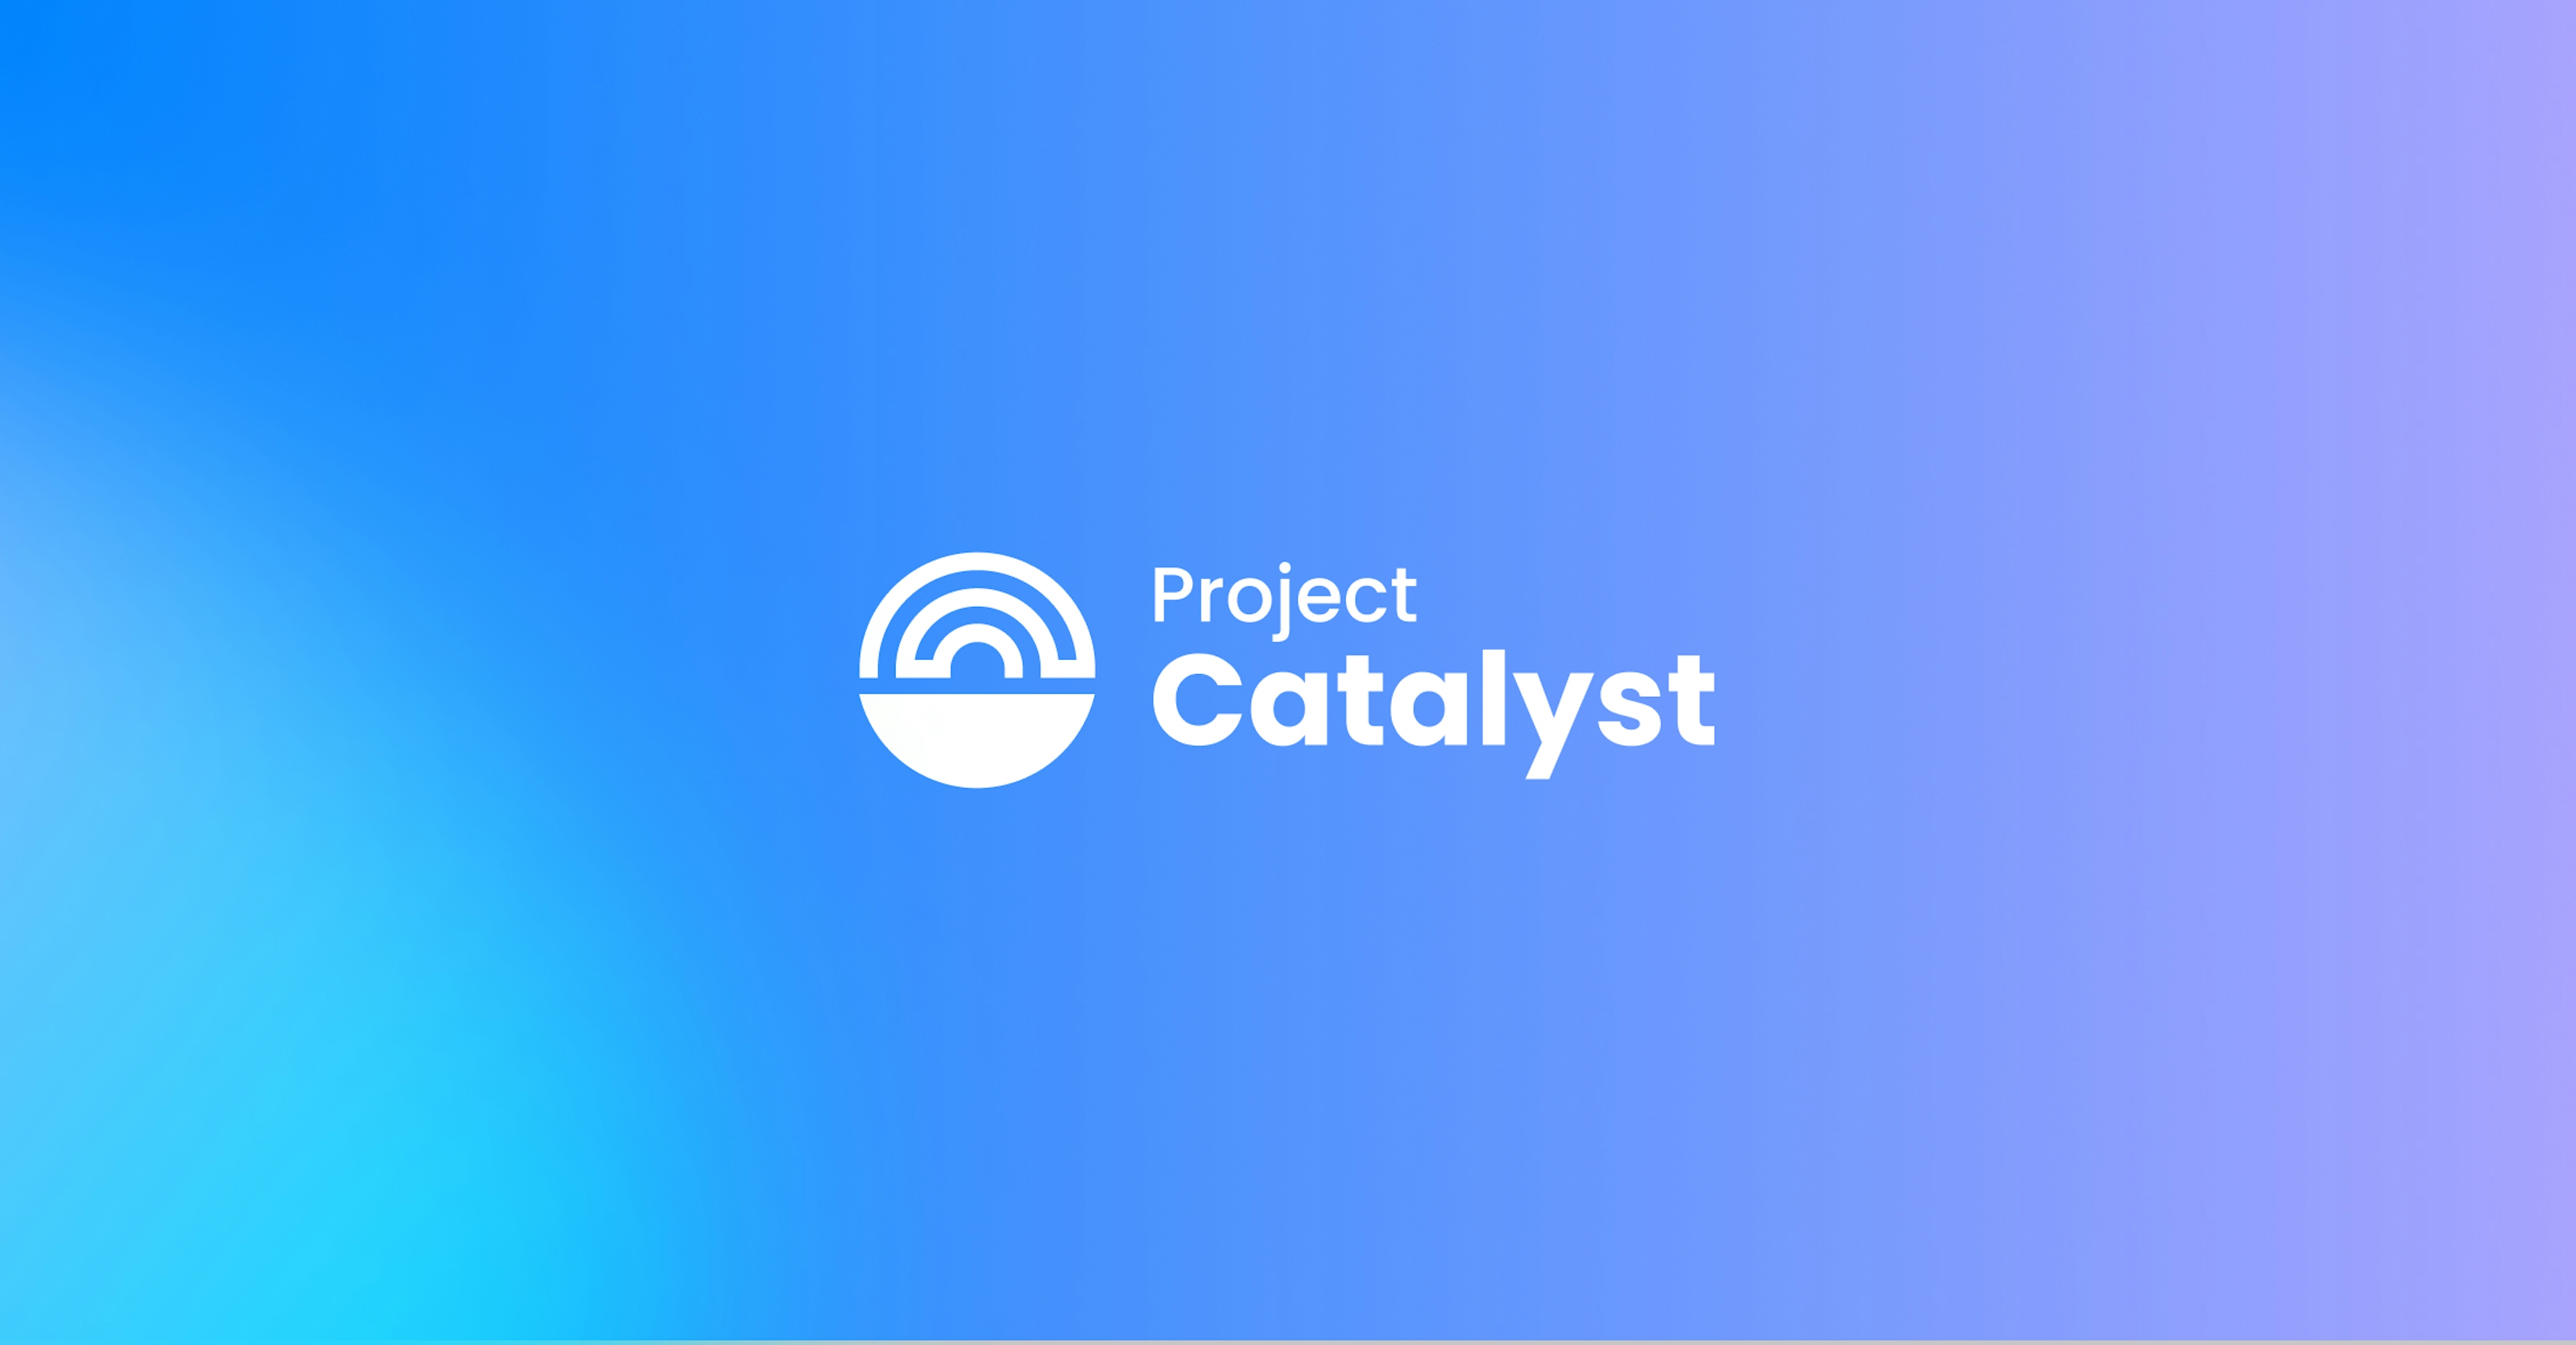 An image that says Project Catalyst next to its circular logo, on top of a sky blue gradient.